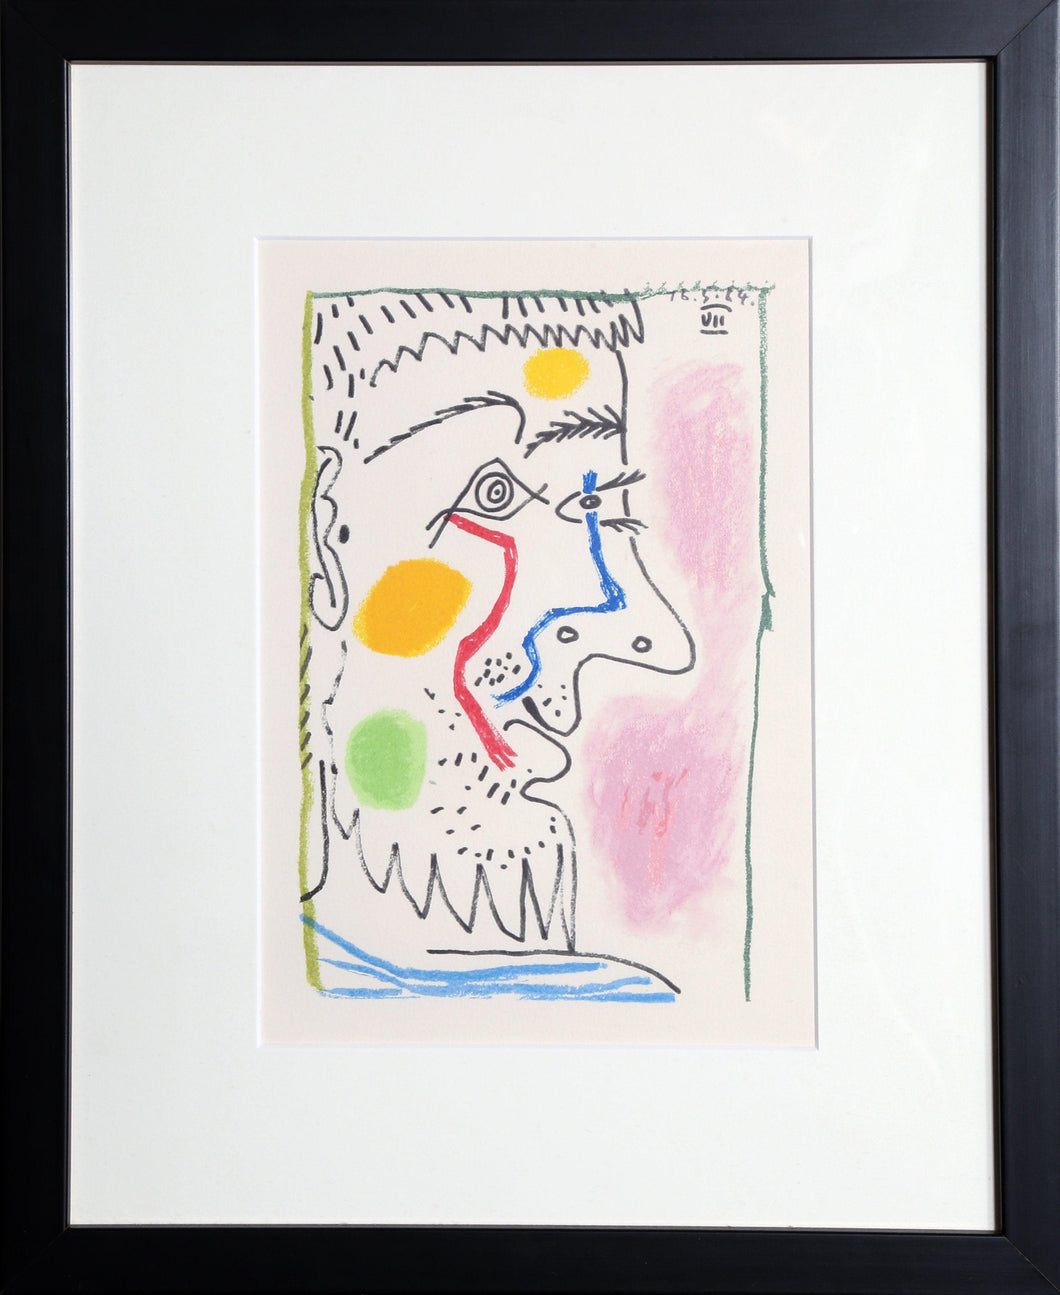 Profile VII Lithograph | Pablo Picasso,{{product.type}}